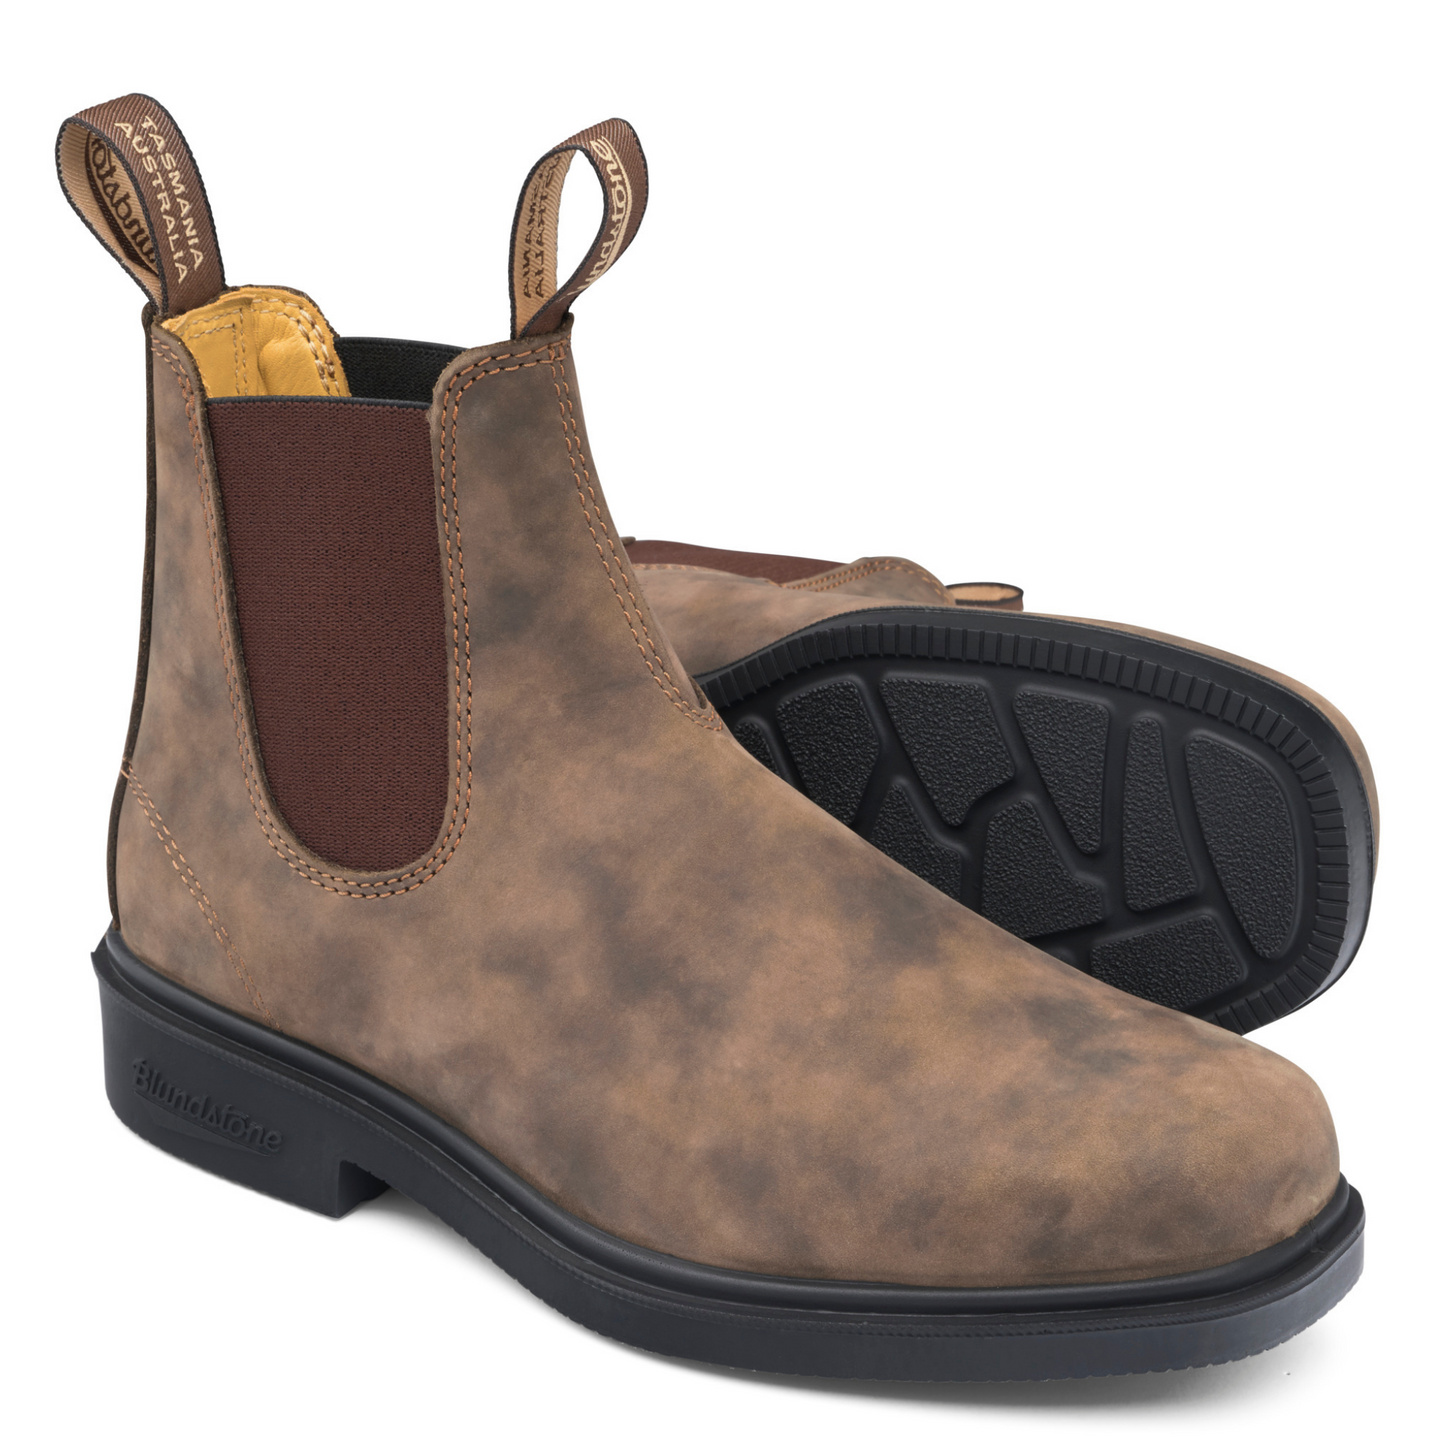 A pair of smokey, brown boots with tan coloured stitching and leather lined interior. Brown elastic sides. 